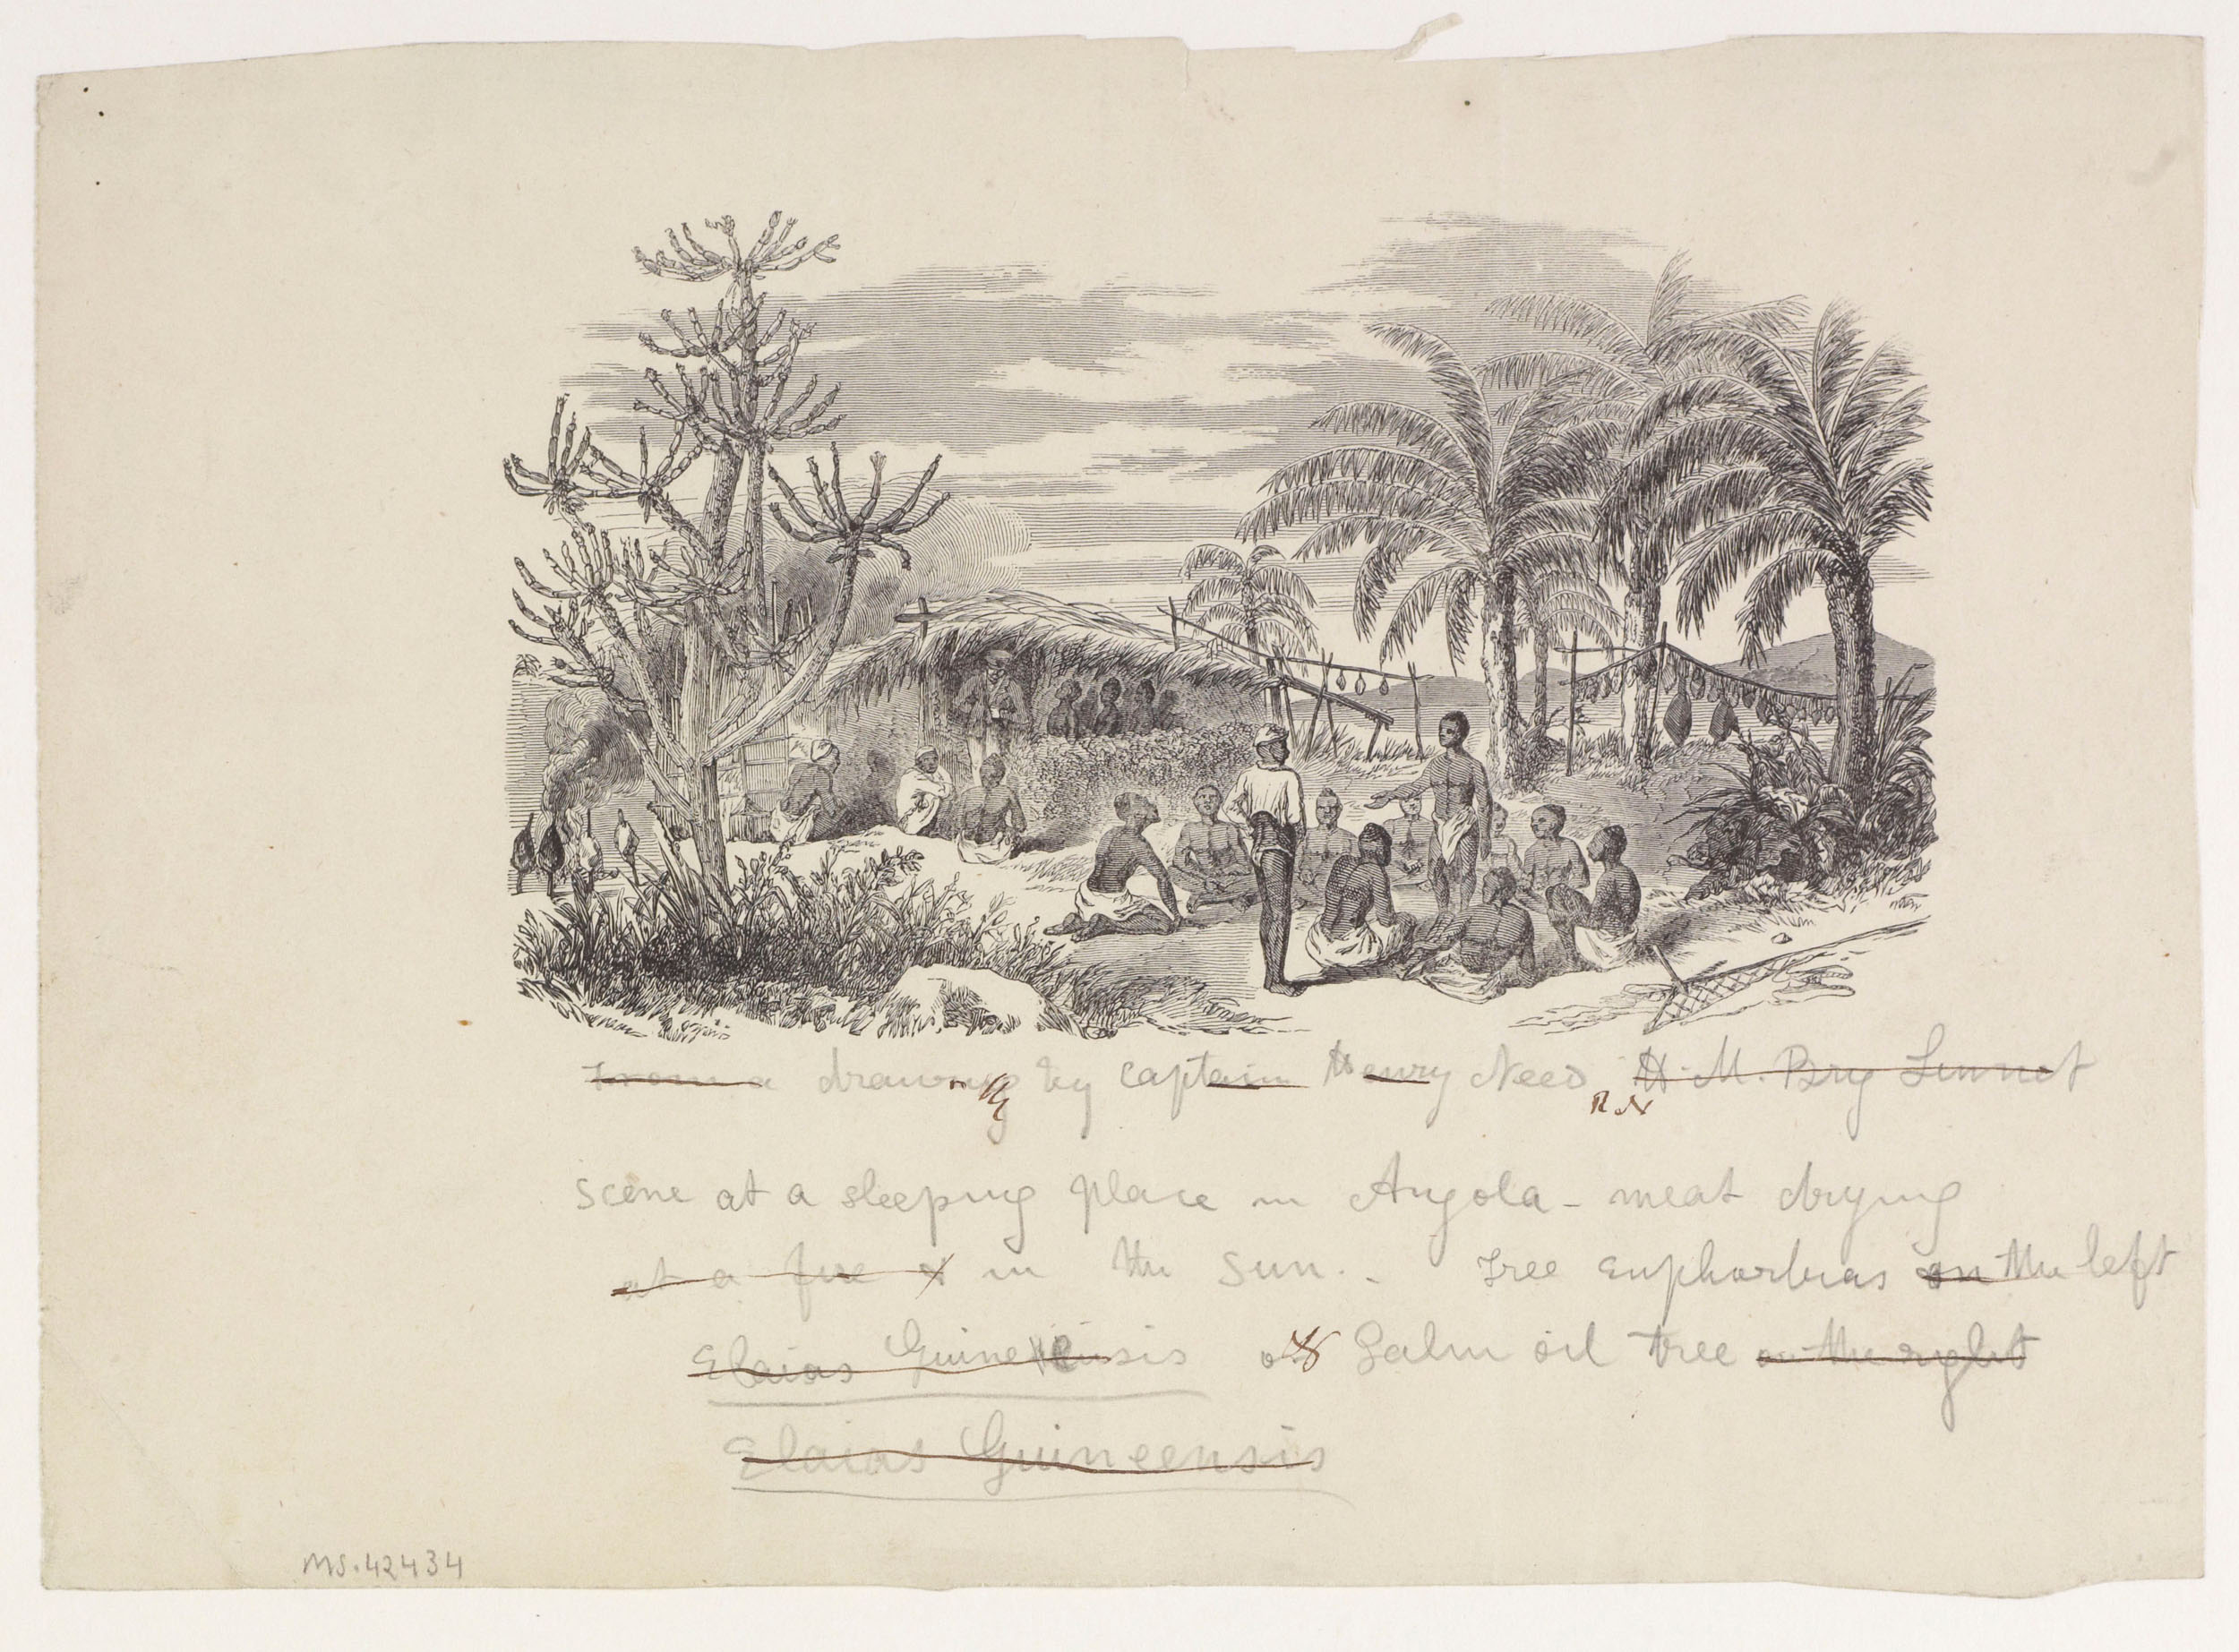 Marked Proof Engraving of Scene at a Sleeping-Place in Angola: Illustration for Missionary Travels and Researches in South Africa, 1856-57. Copyright National Library of Scotland and Dr. Neil Imray Livingstone Wilson (as relevant). Creative Commons Share-alike 2.5 UK: Scotland (https://creativecommons.org/licenses/by-nc-sa/2.5/scotland/).